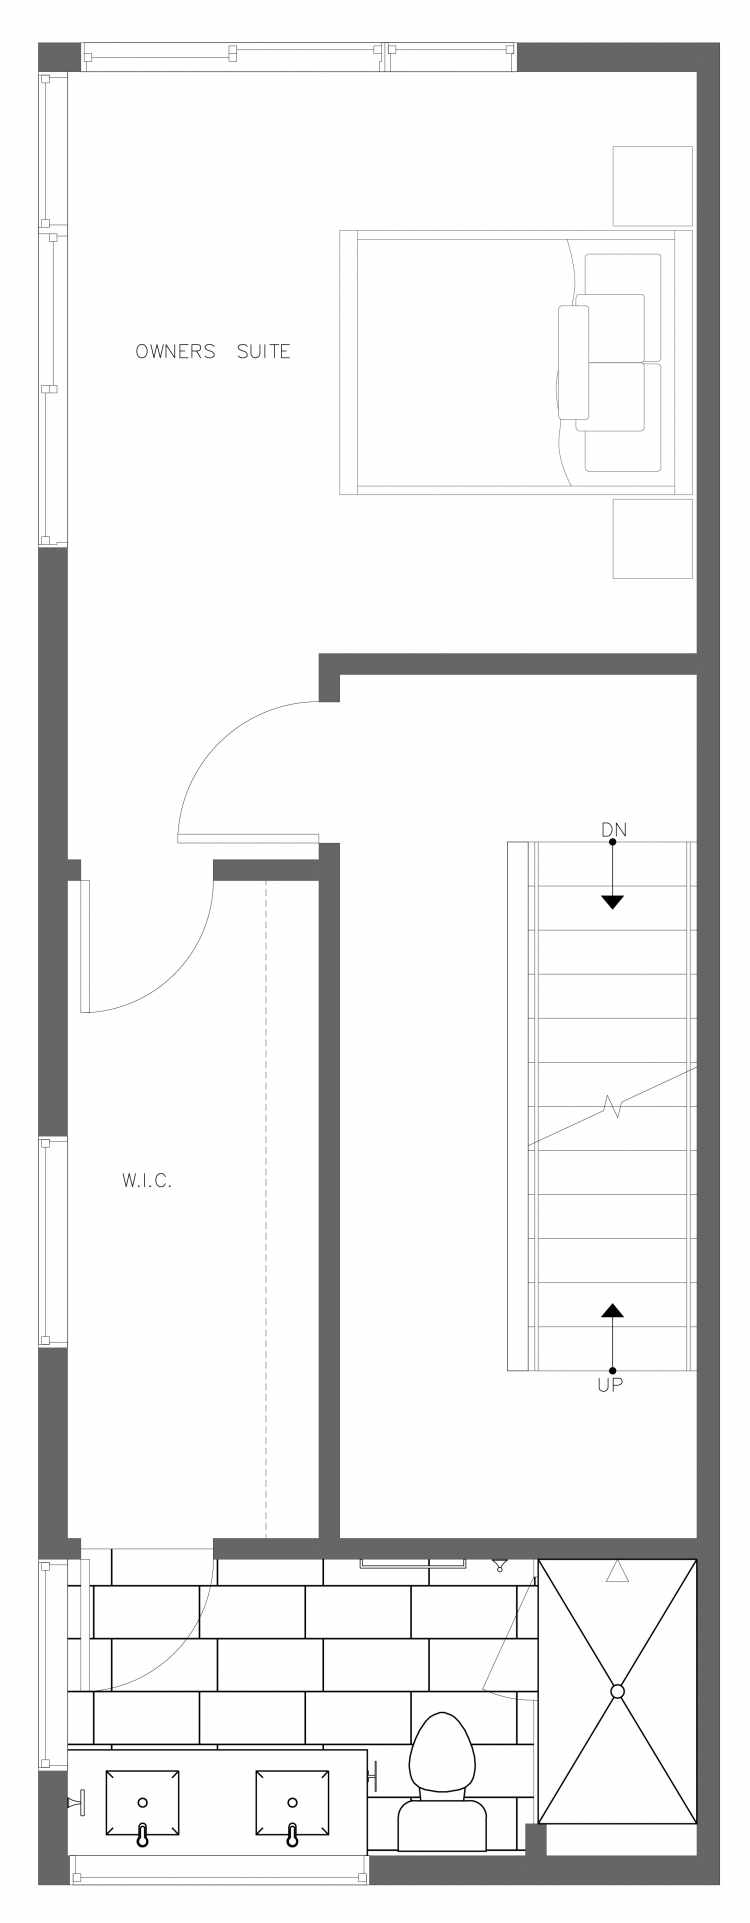 Third Floor Plan of 3410A 15th Ave W, One of the Arlo Townhomes in North Queen Anne